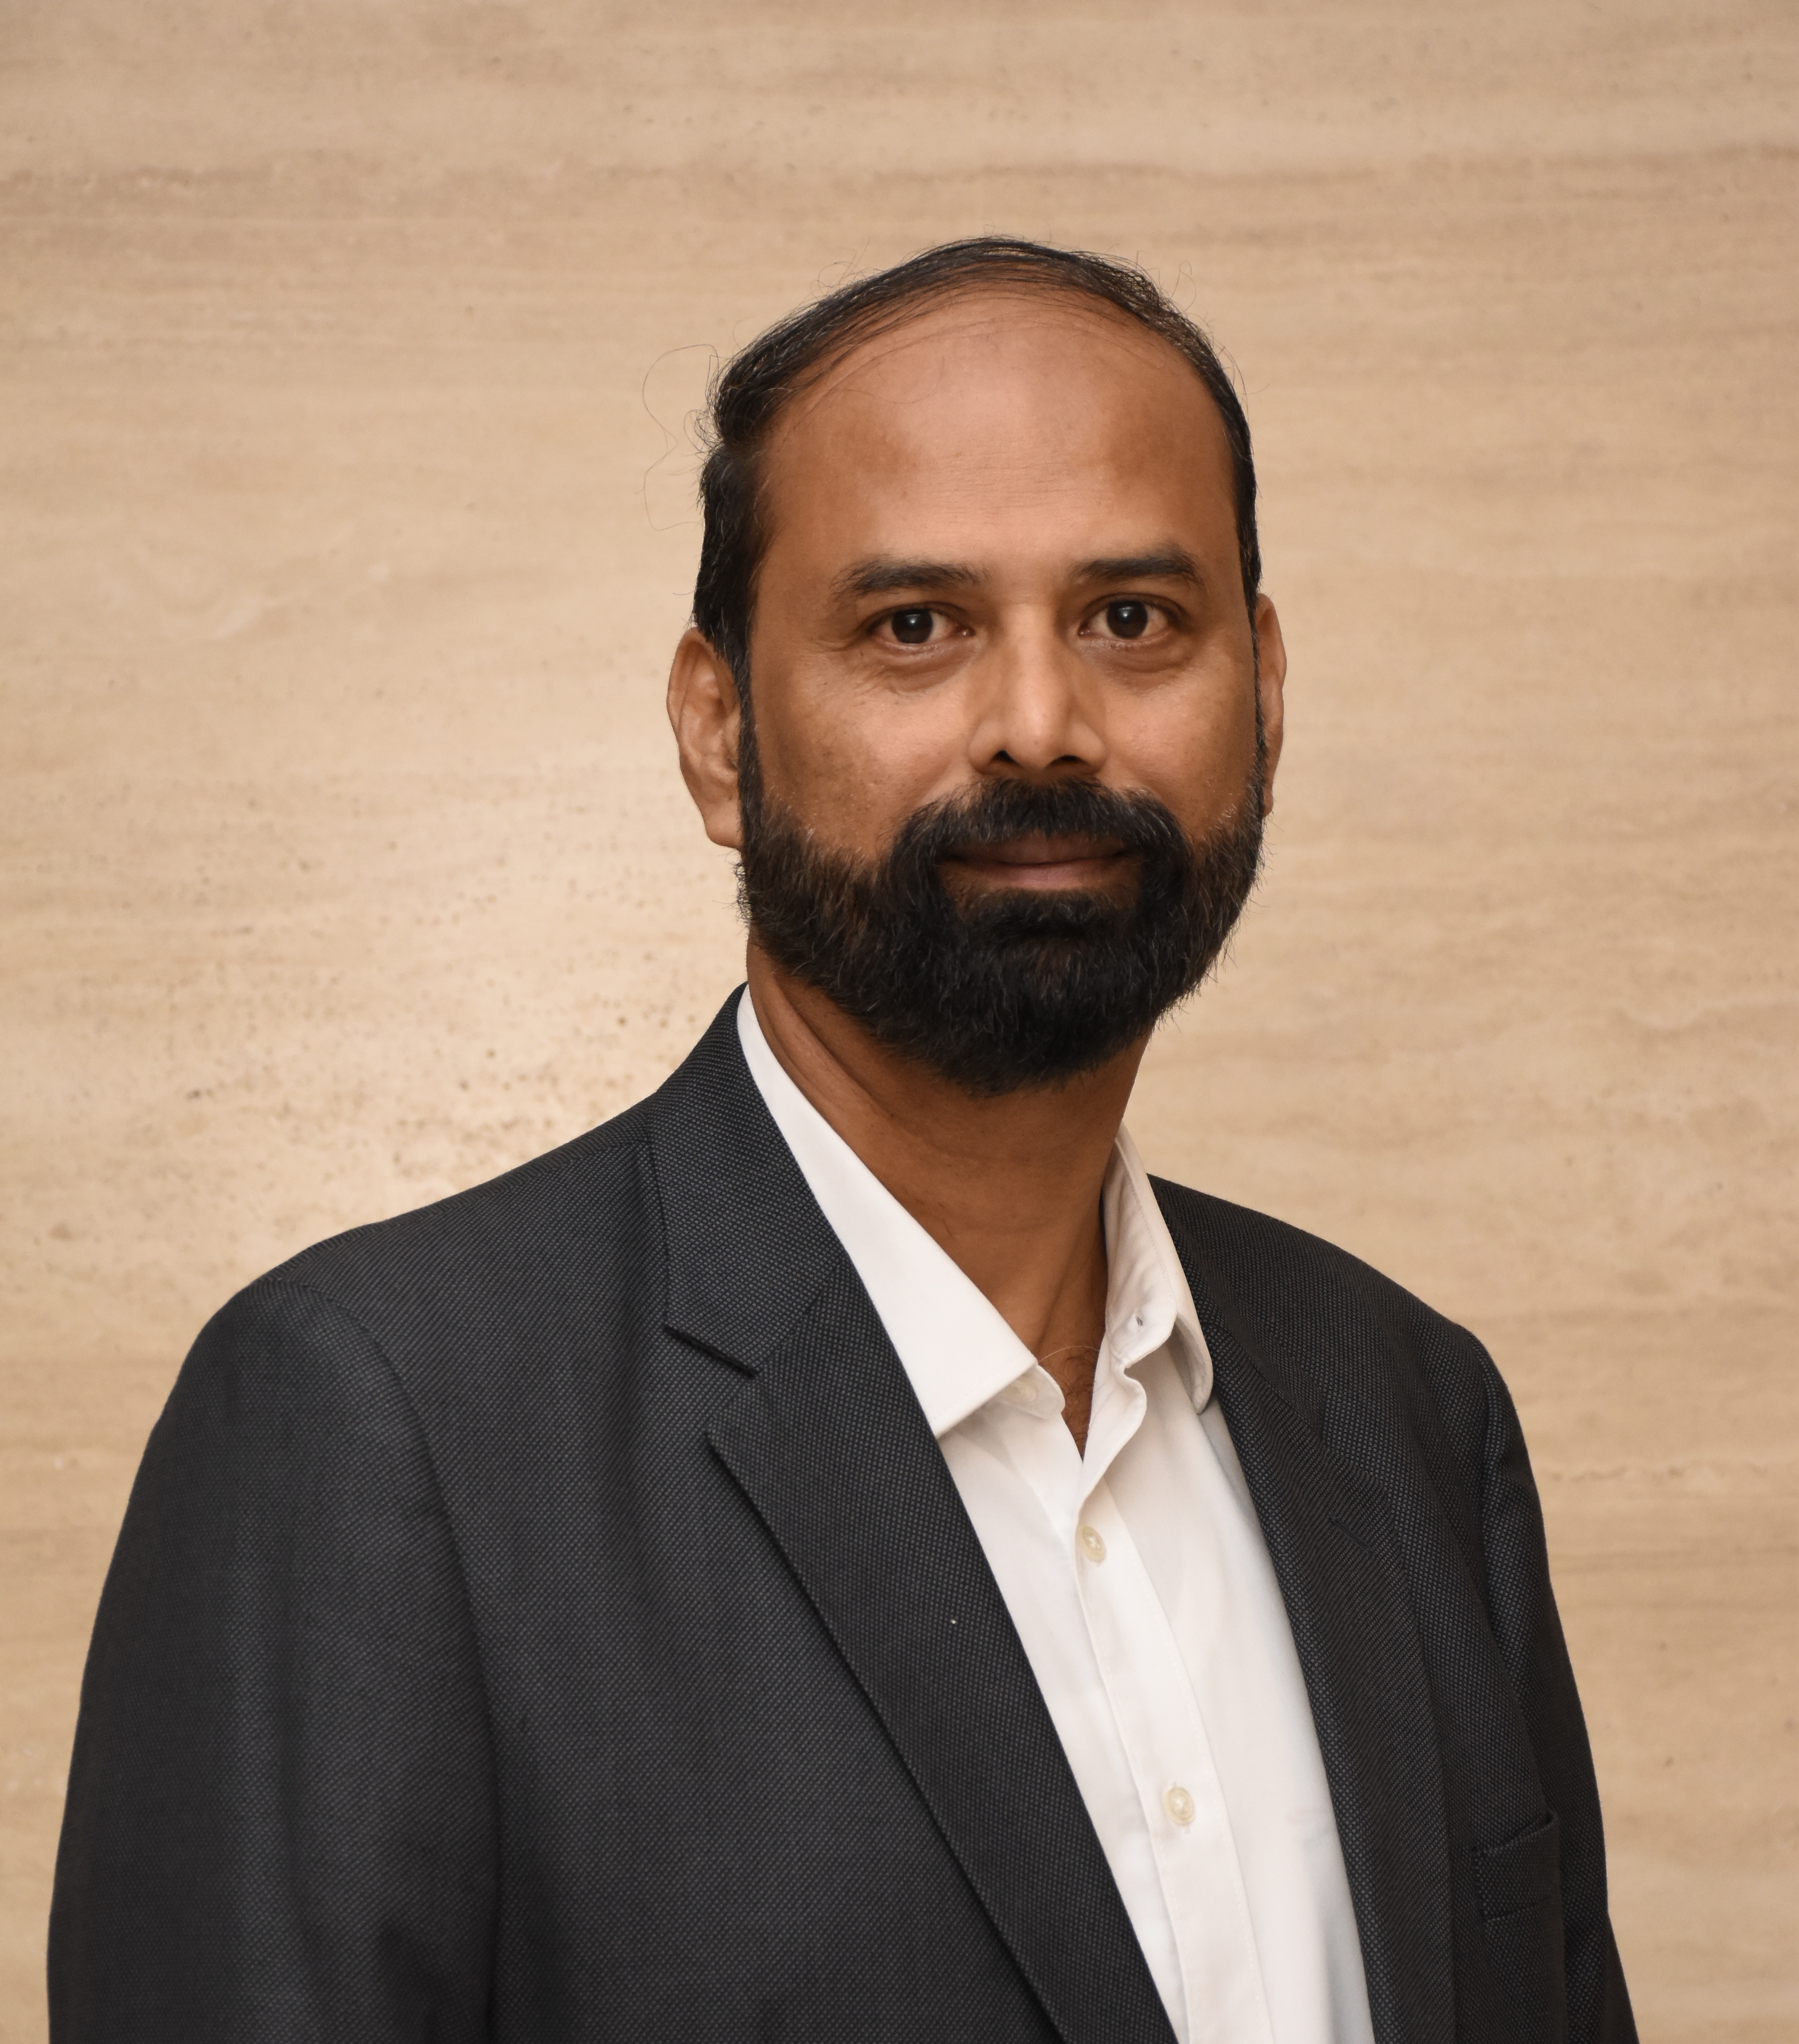 Xanadu Realty Appoints K.N. Swaminathan as the CFO